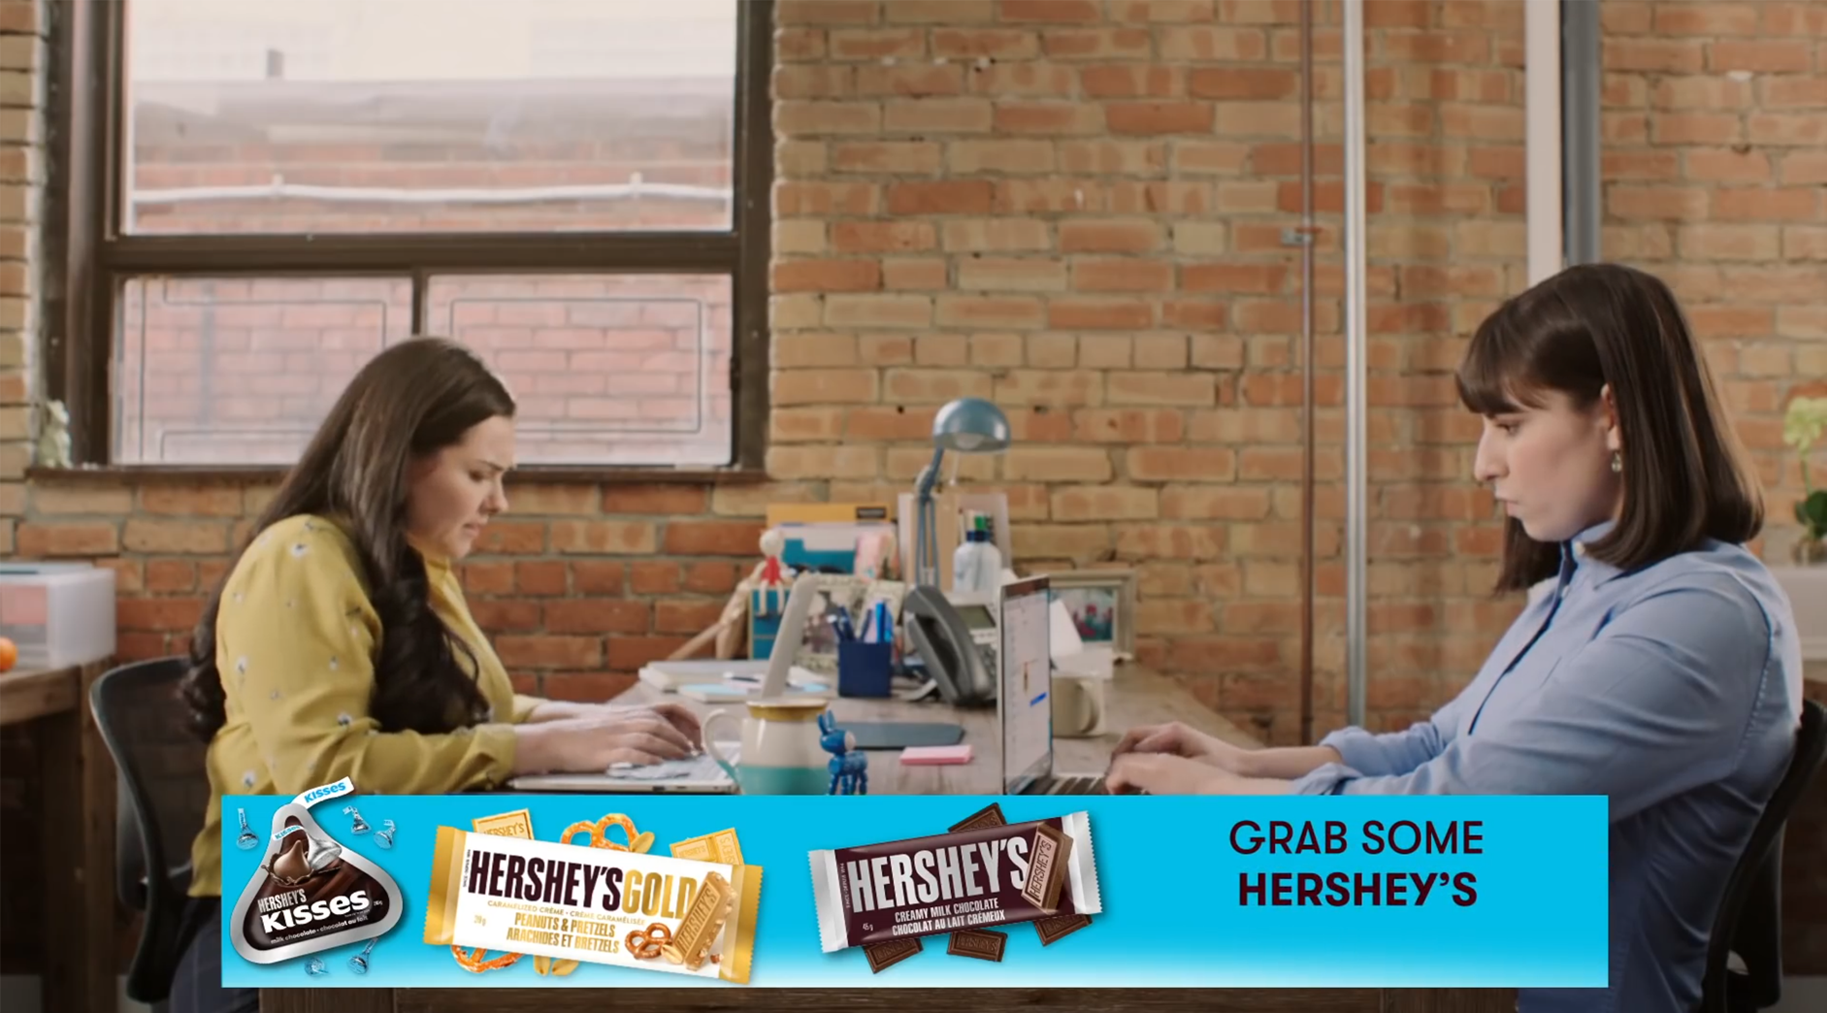 Hershey's - The Proposal - Commercial 2019, Laura Commisso (Actor)